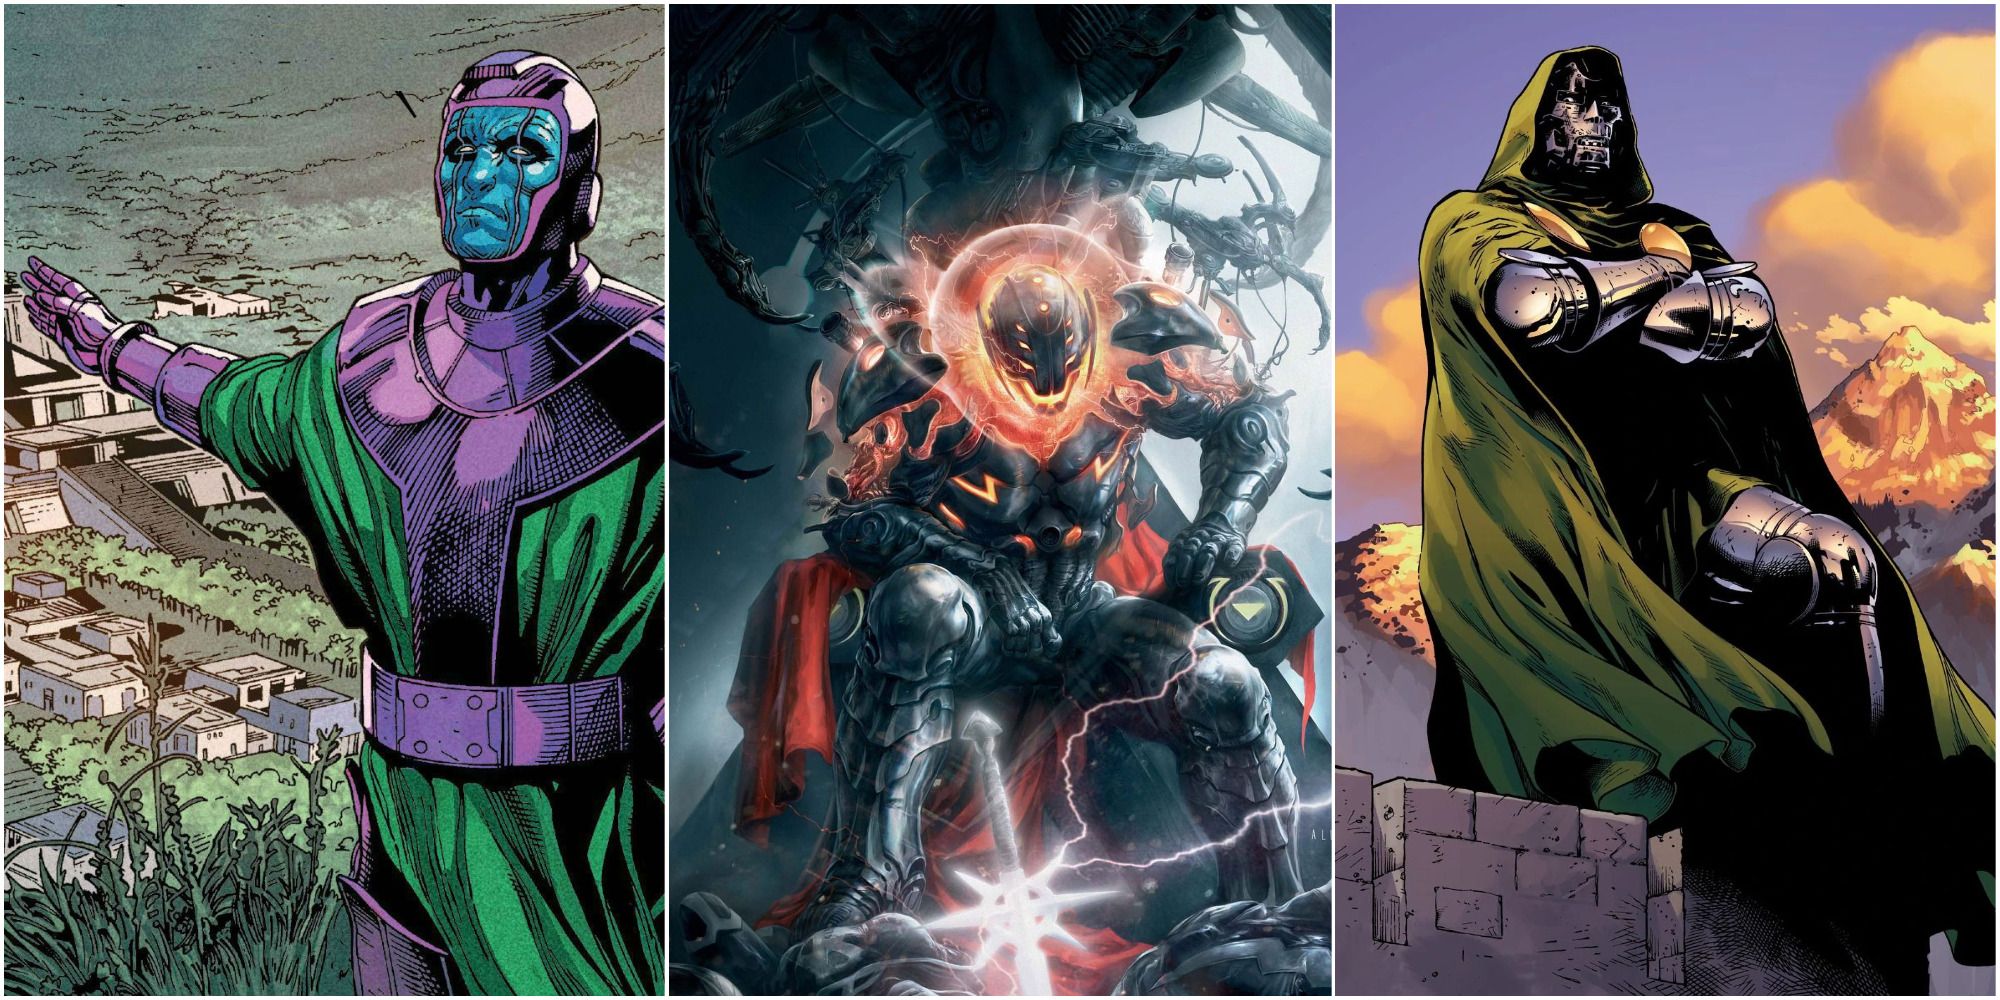 Who was the first Marvel villain?